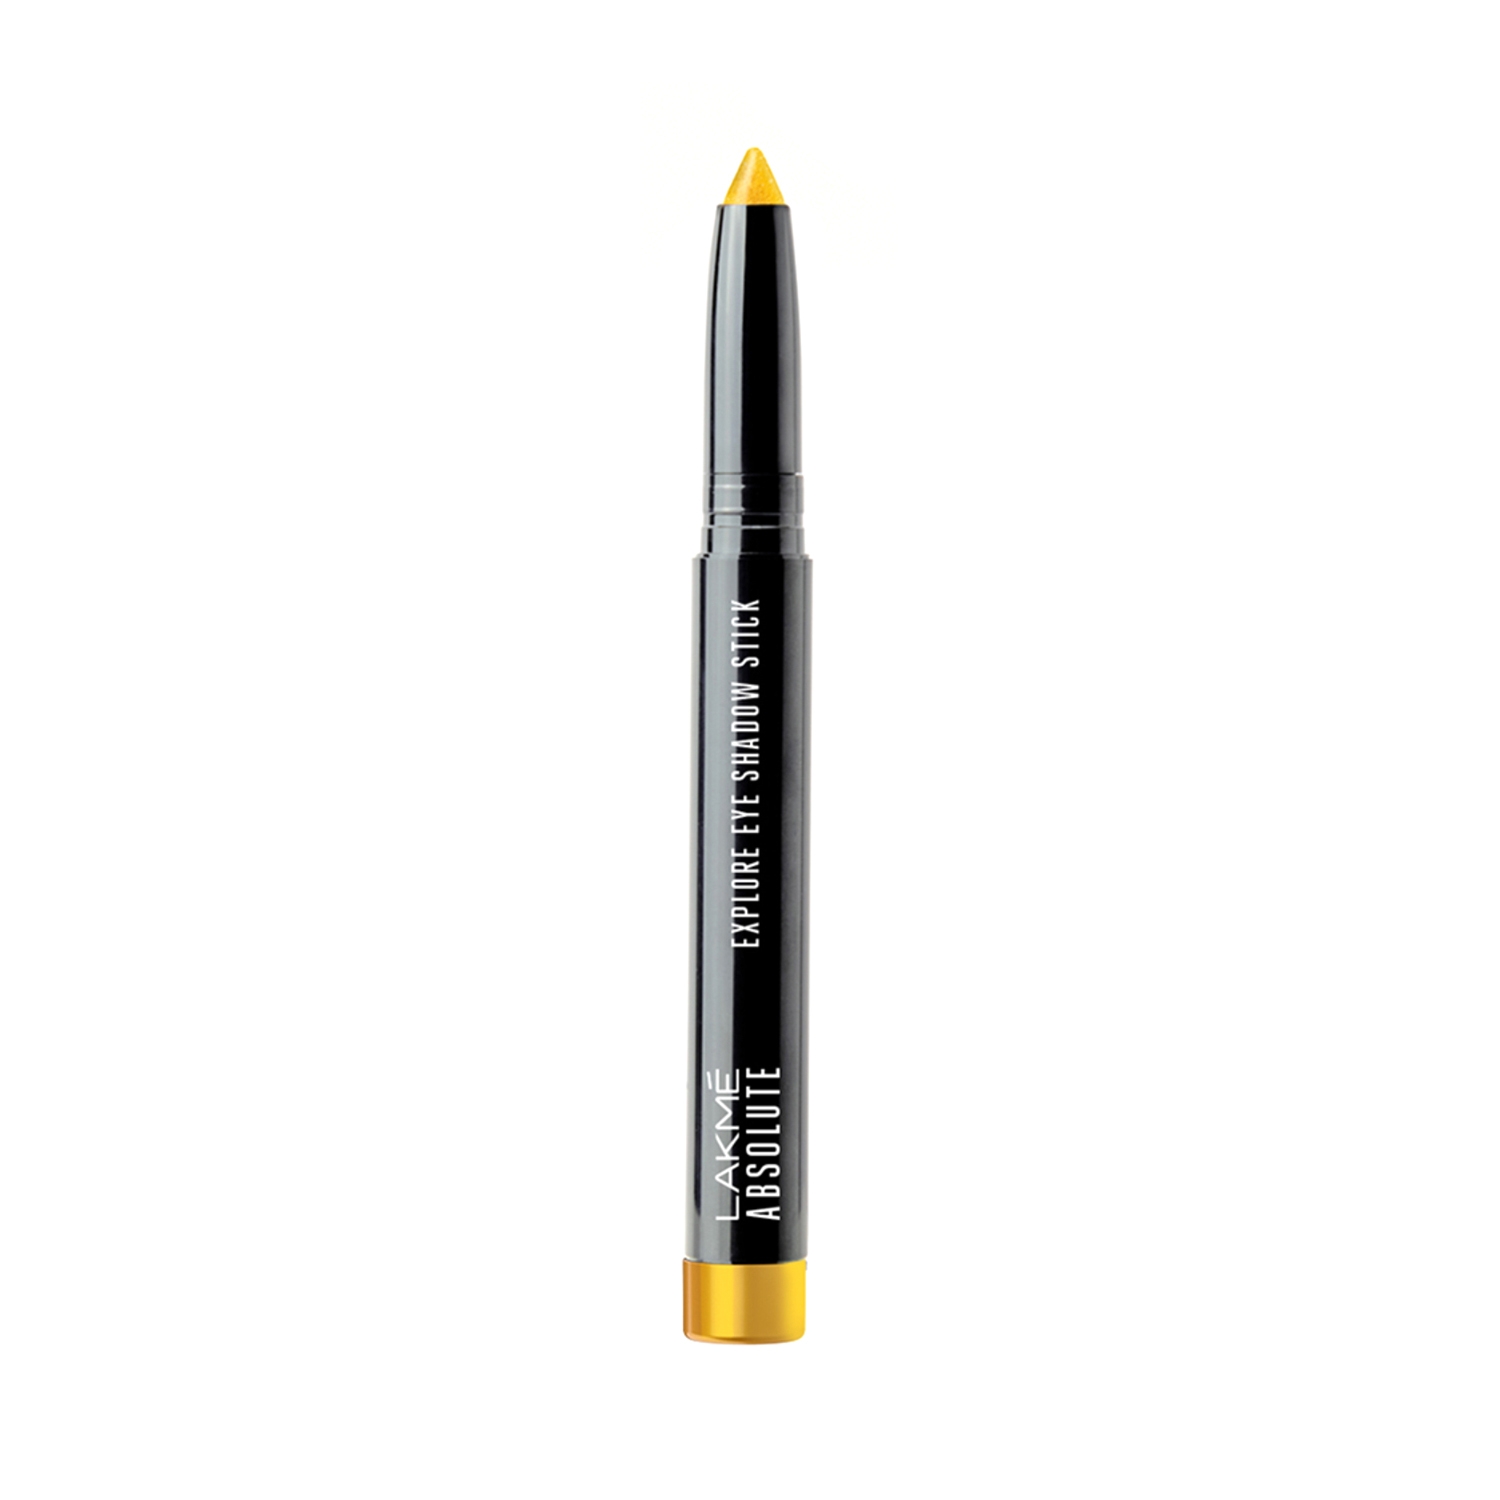 Lakme | Lakme Absolute Explore Eye Shadow Stick - Shimmering Gold (1.4g)